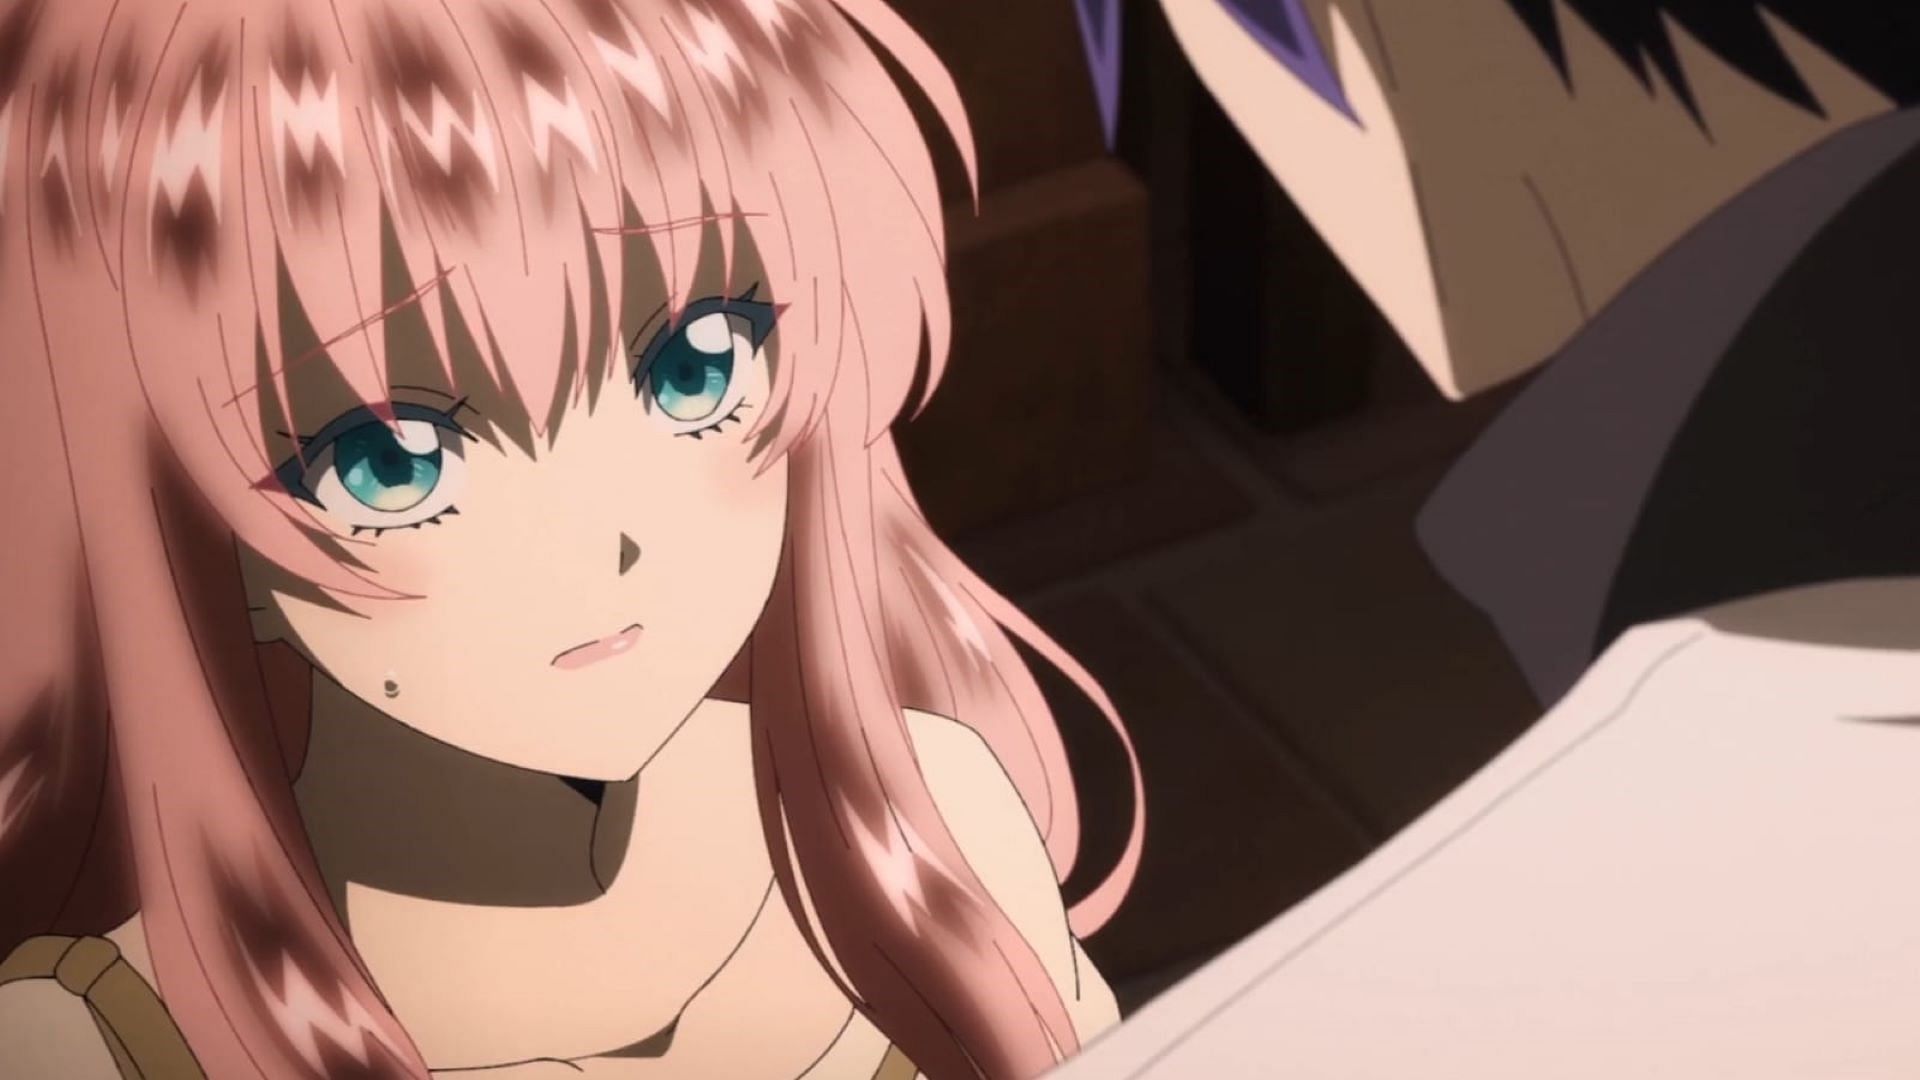 Rishe, as seen in the anime (Image via Studio KAI and Hornets)